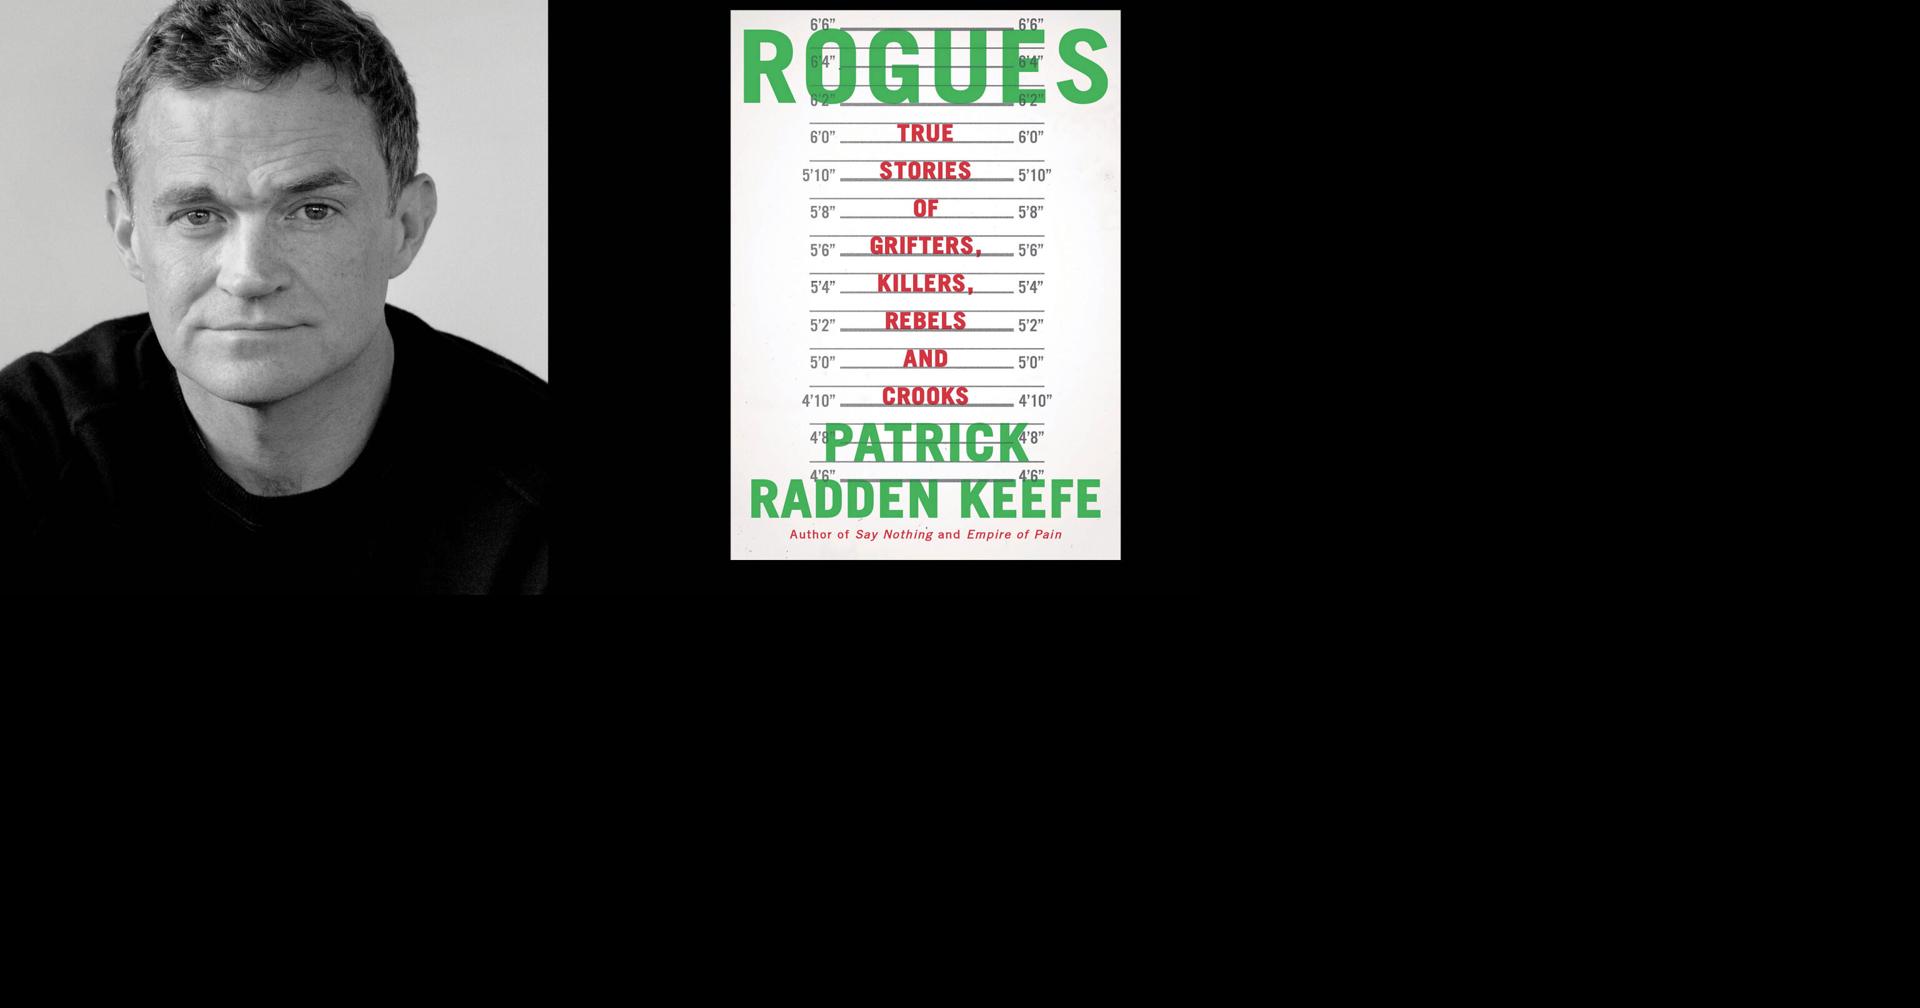 Patrick Radden Keefe's Rogues Draws Back the Curtain on Secret Worlds